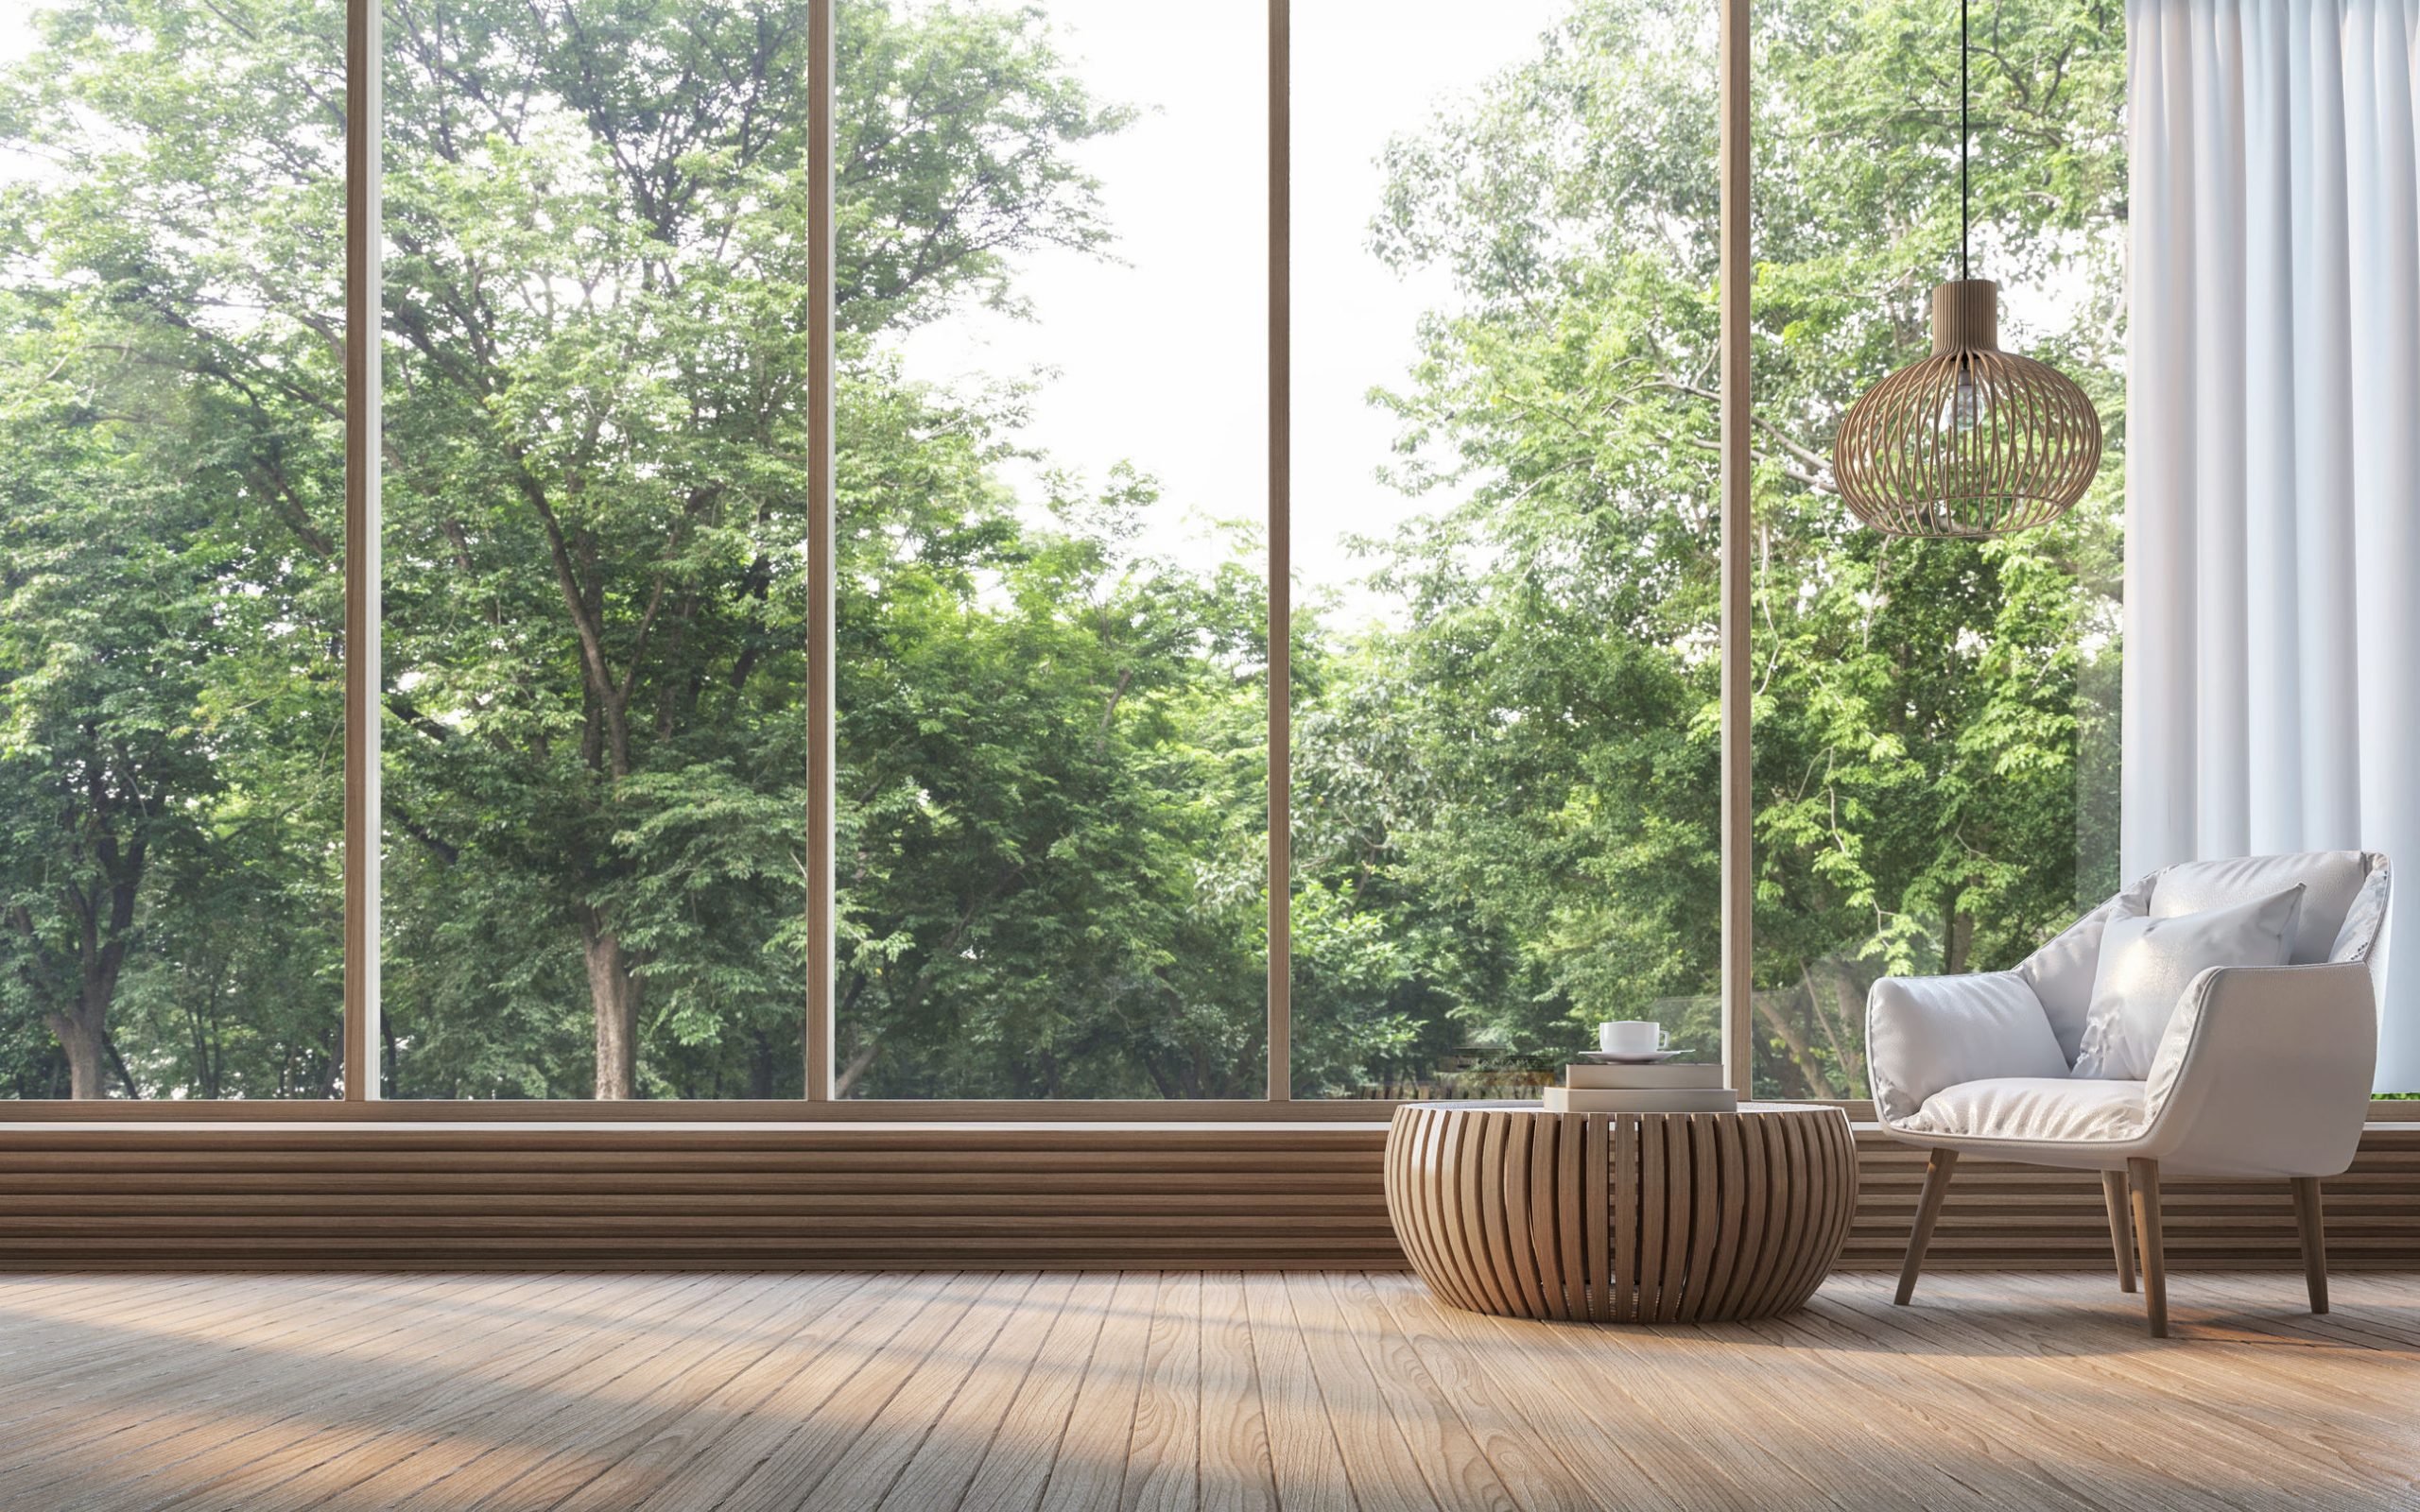 How to Prevent Sun Glare in Your Home with Window Film